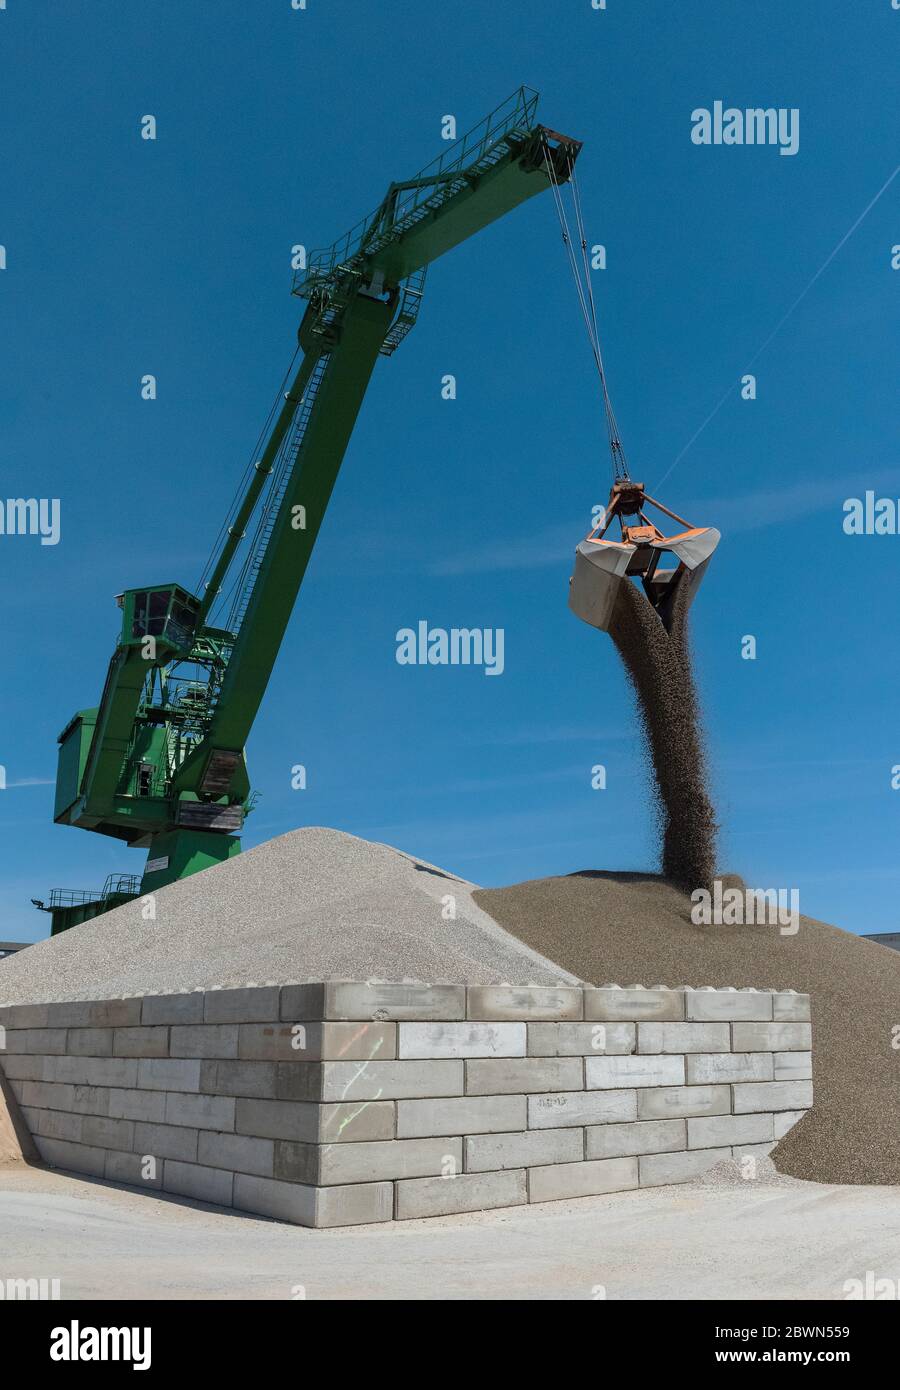 Green harbor crane pours sand and gravel onto a hill Stock Photo